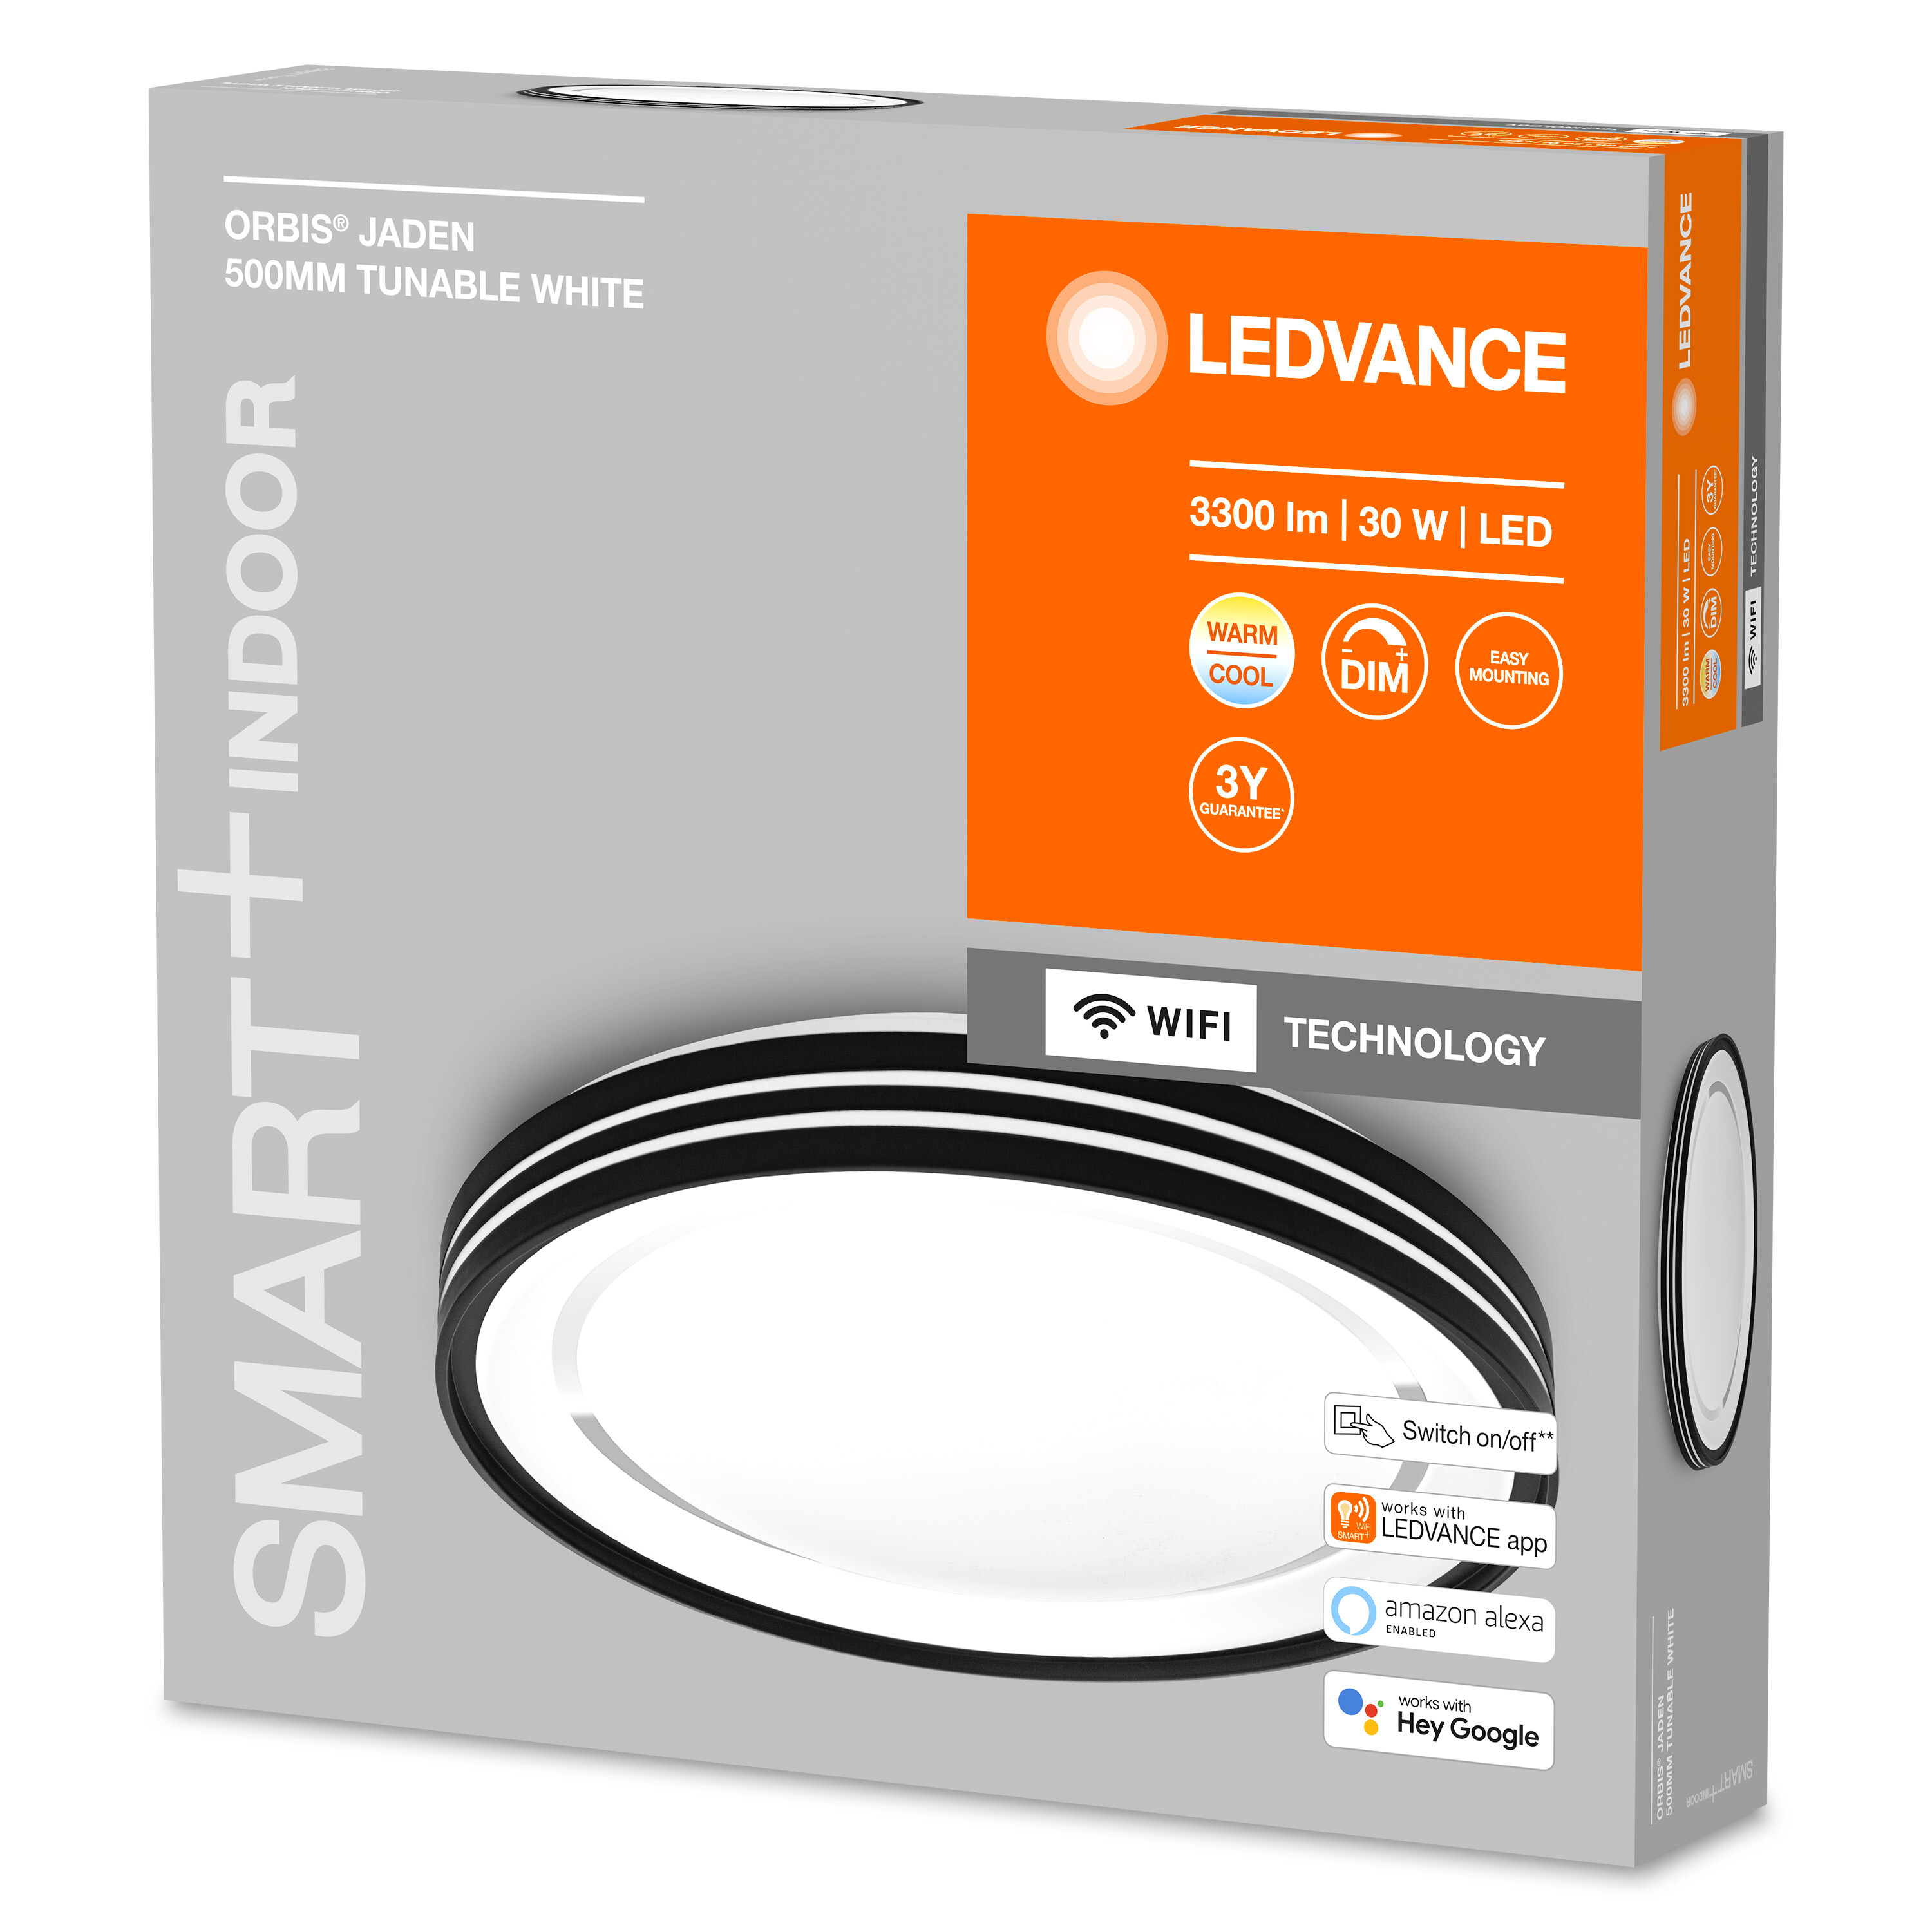 LEDVANCE TECHNOLOGY WIFI DECORATIVE CEILING Warmweiß WITH Deckenbeleuchtung